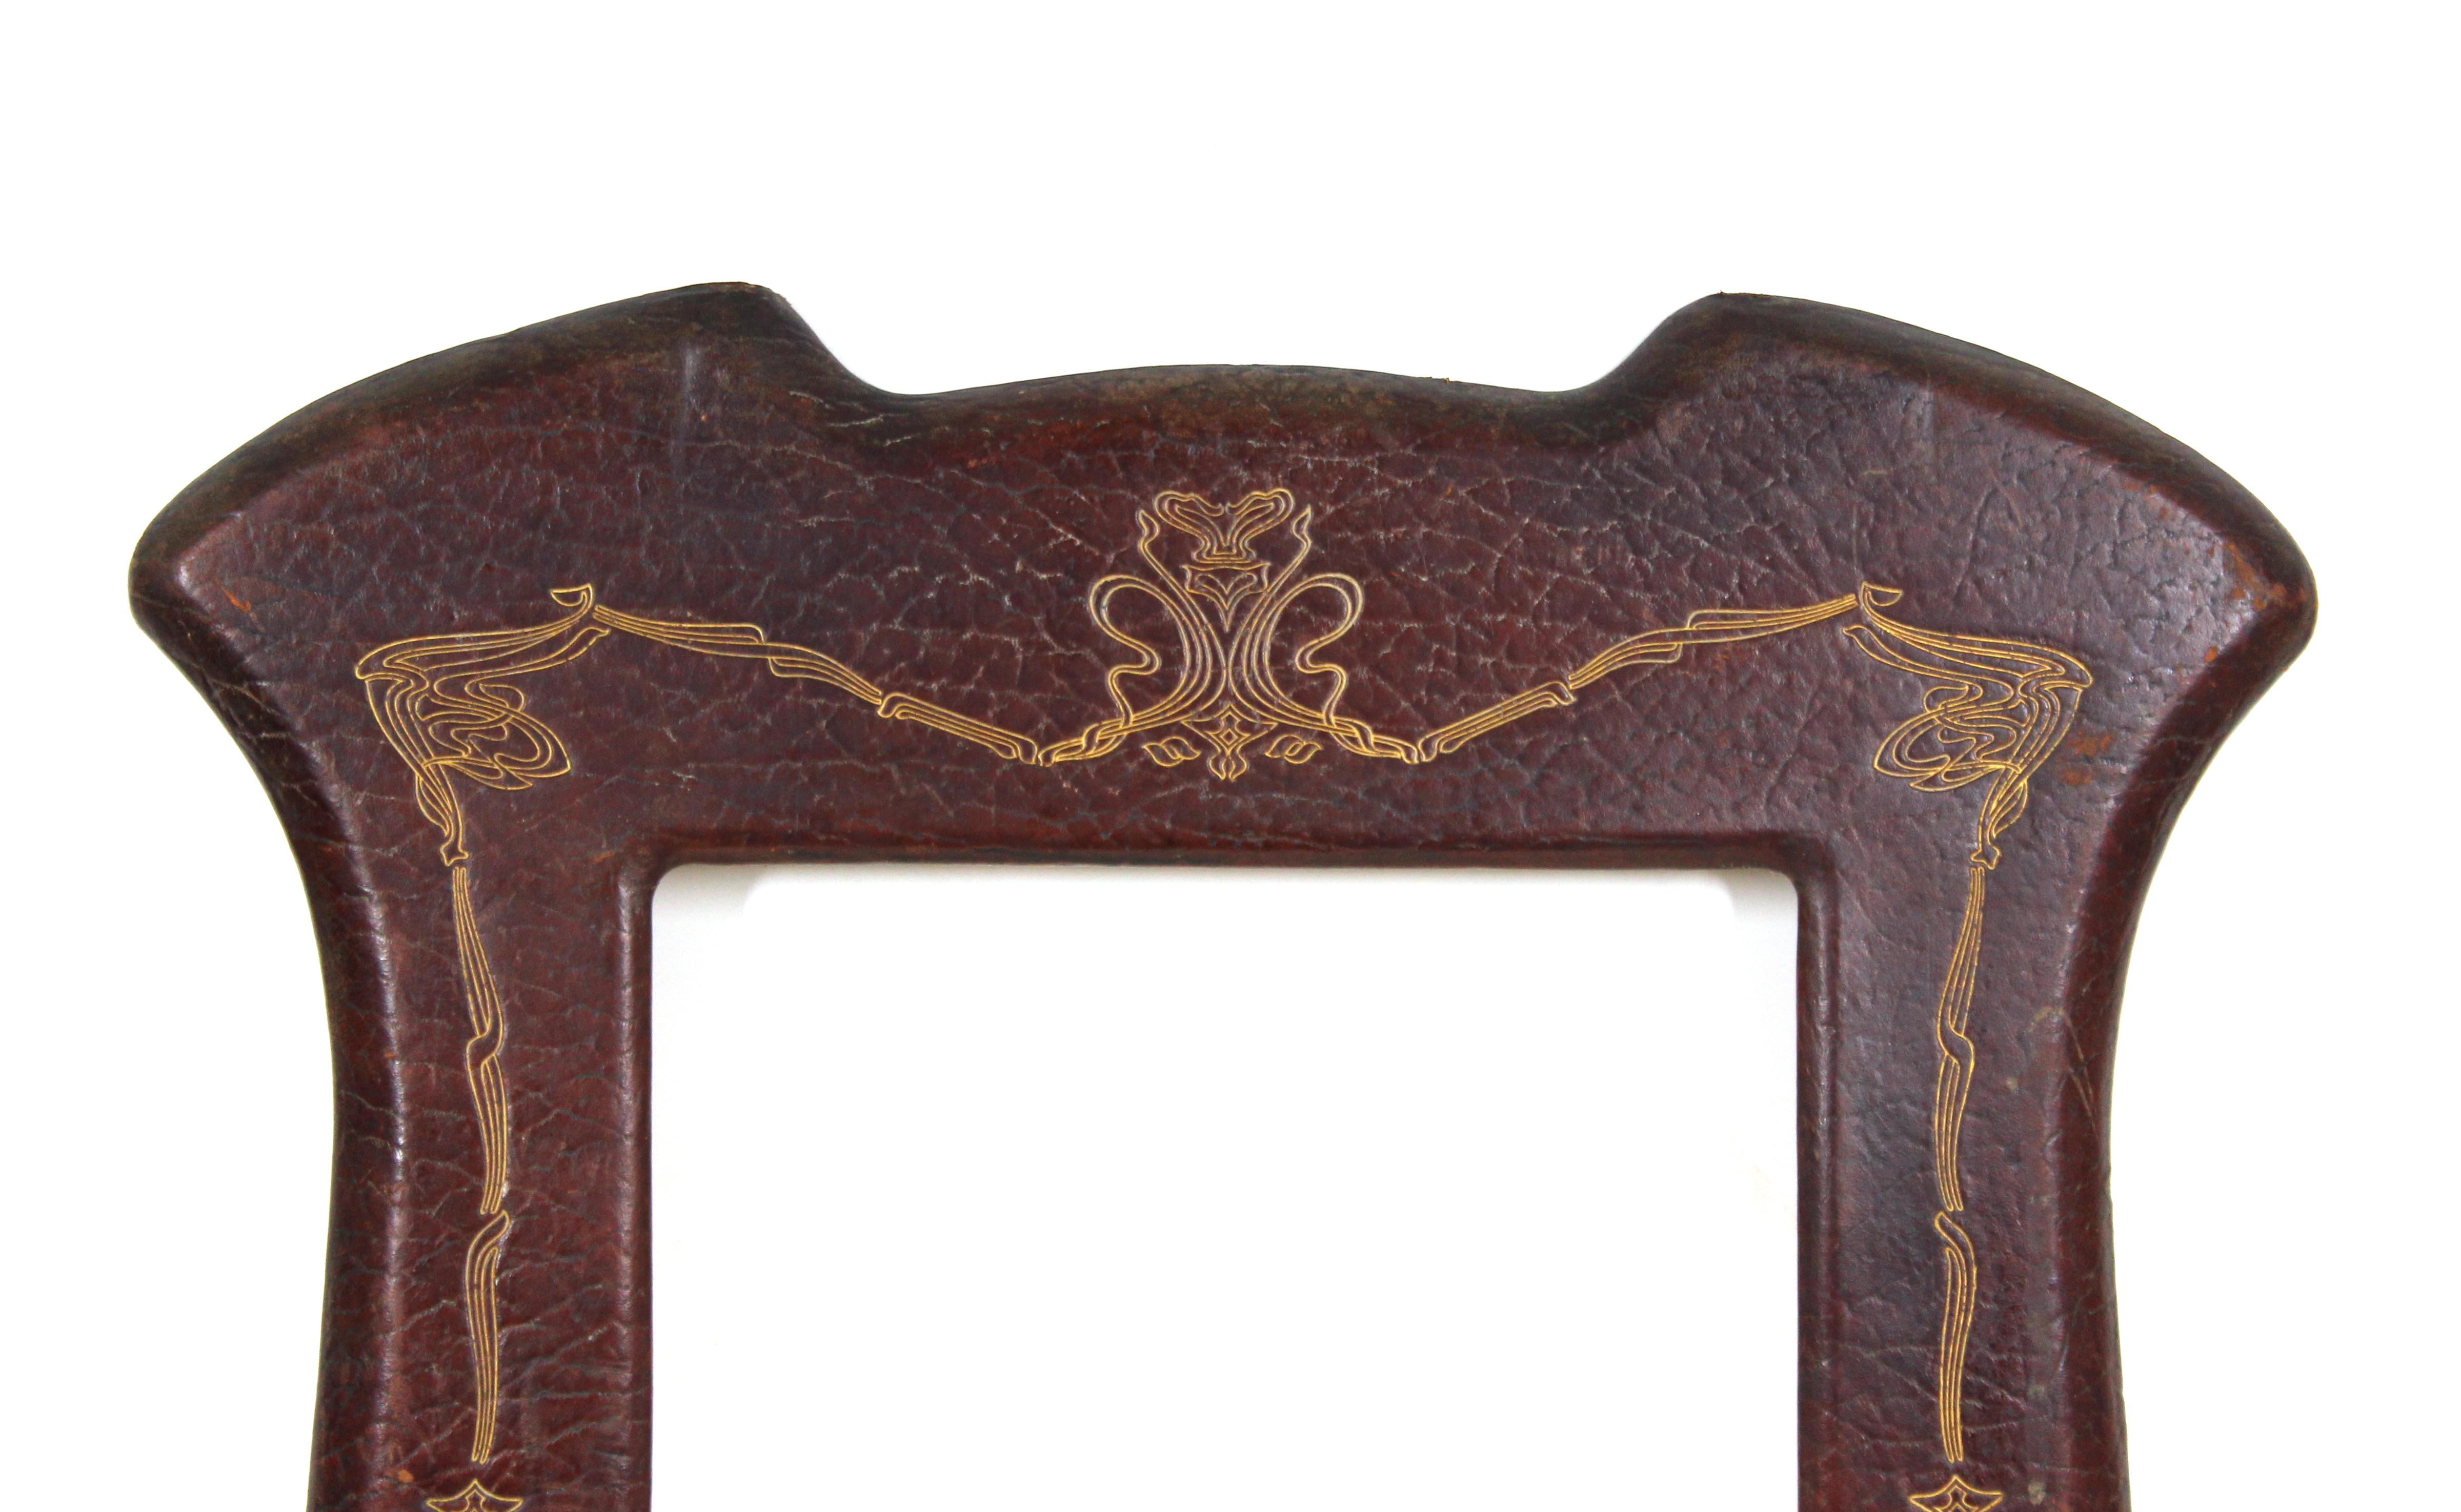 German Jugenstil picture or mirror desk frame in elaborately tooled and gilt leather. The piece was made in circa 1905 by A. Rixner in Linz, Germany. Makers mark on the front and stamp on the back side: 